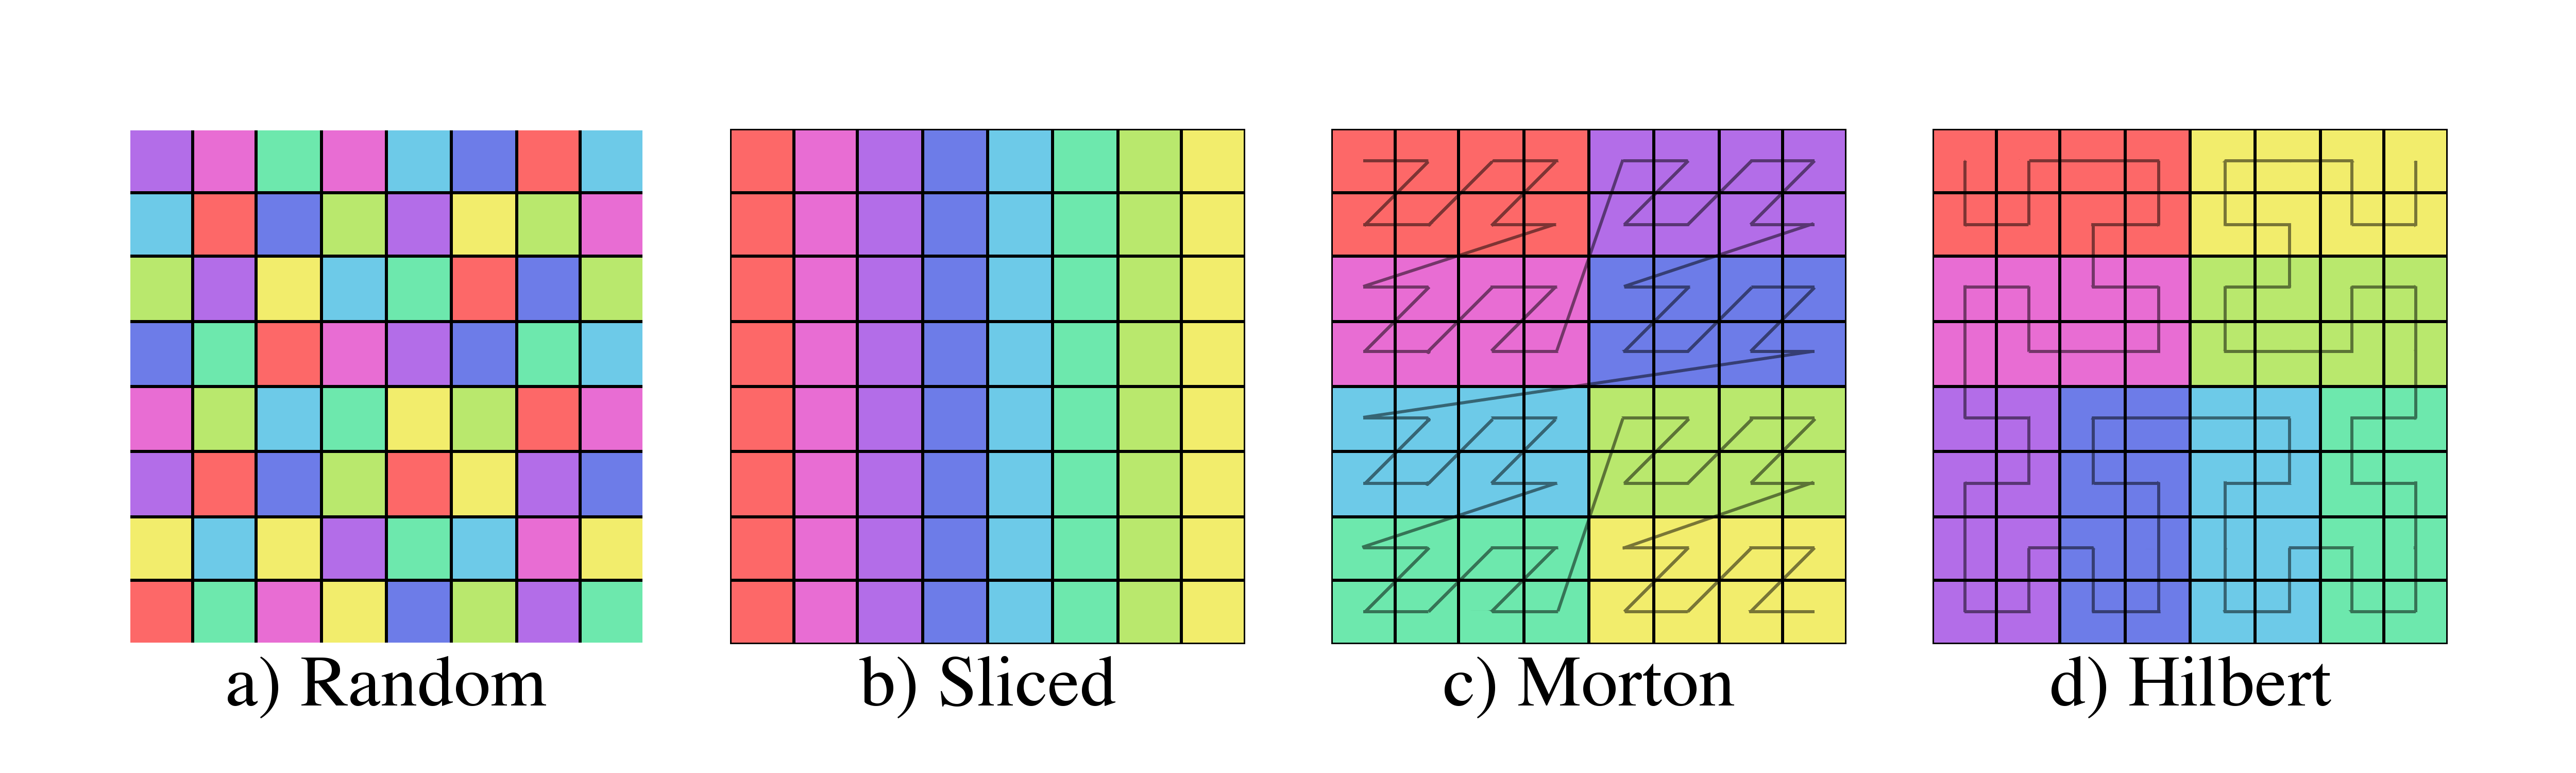 Figure 14: Examples of four different schemes for partitioning a 2D domain between 8 files. Each color represents a different file.